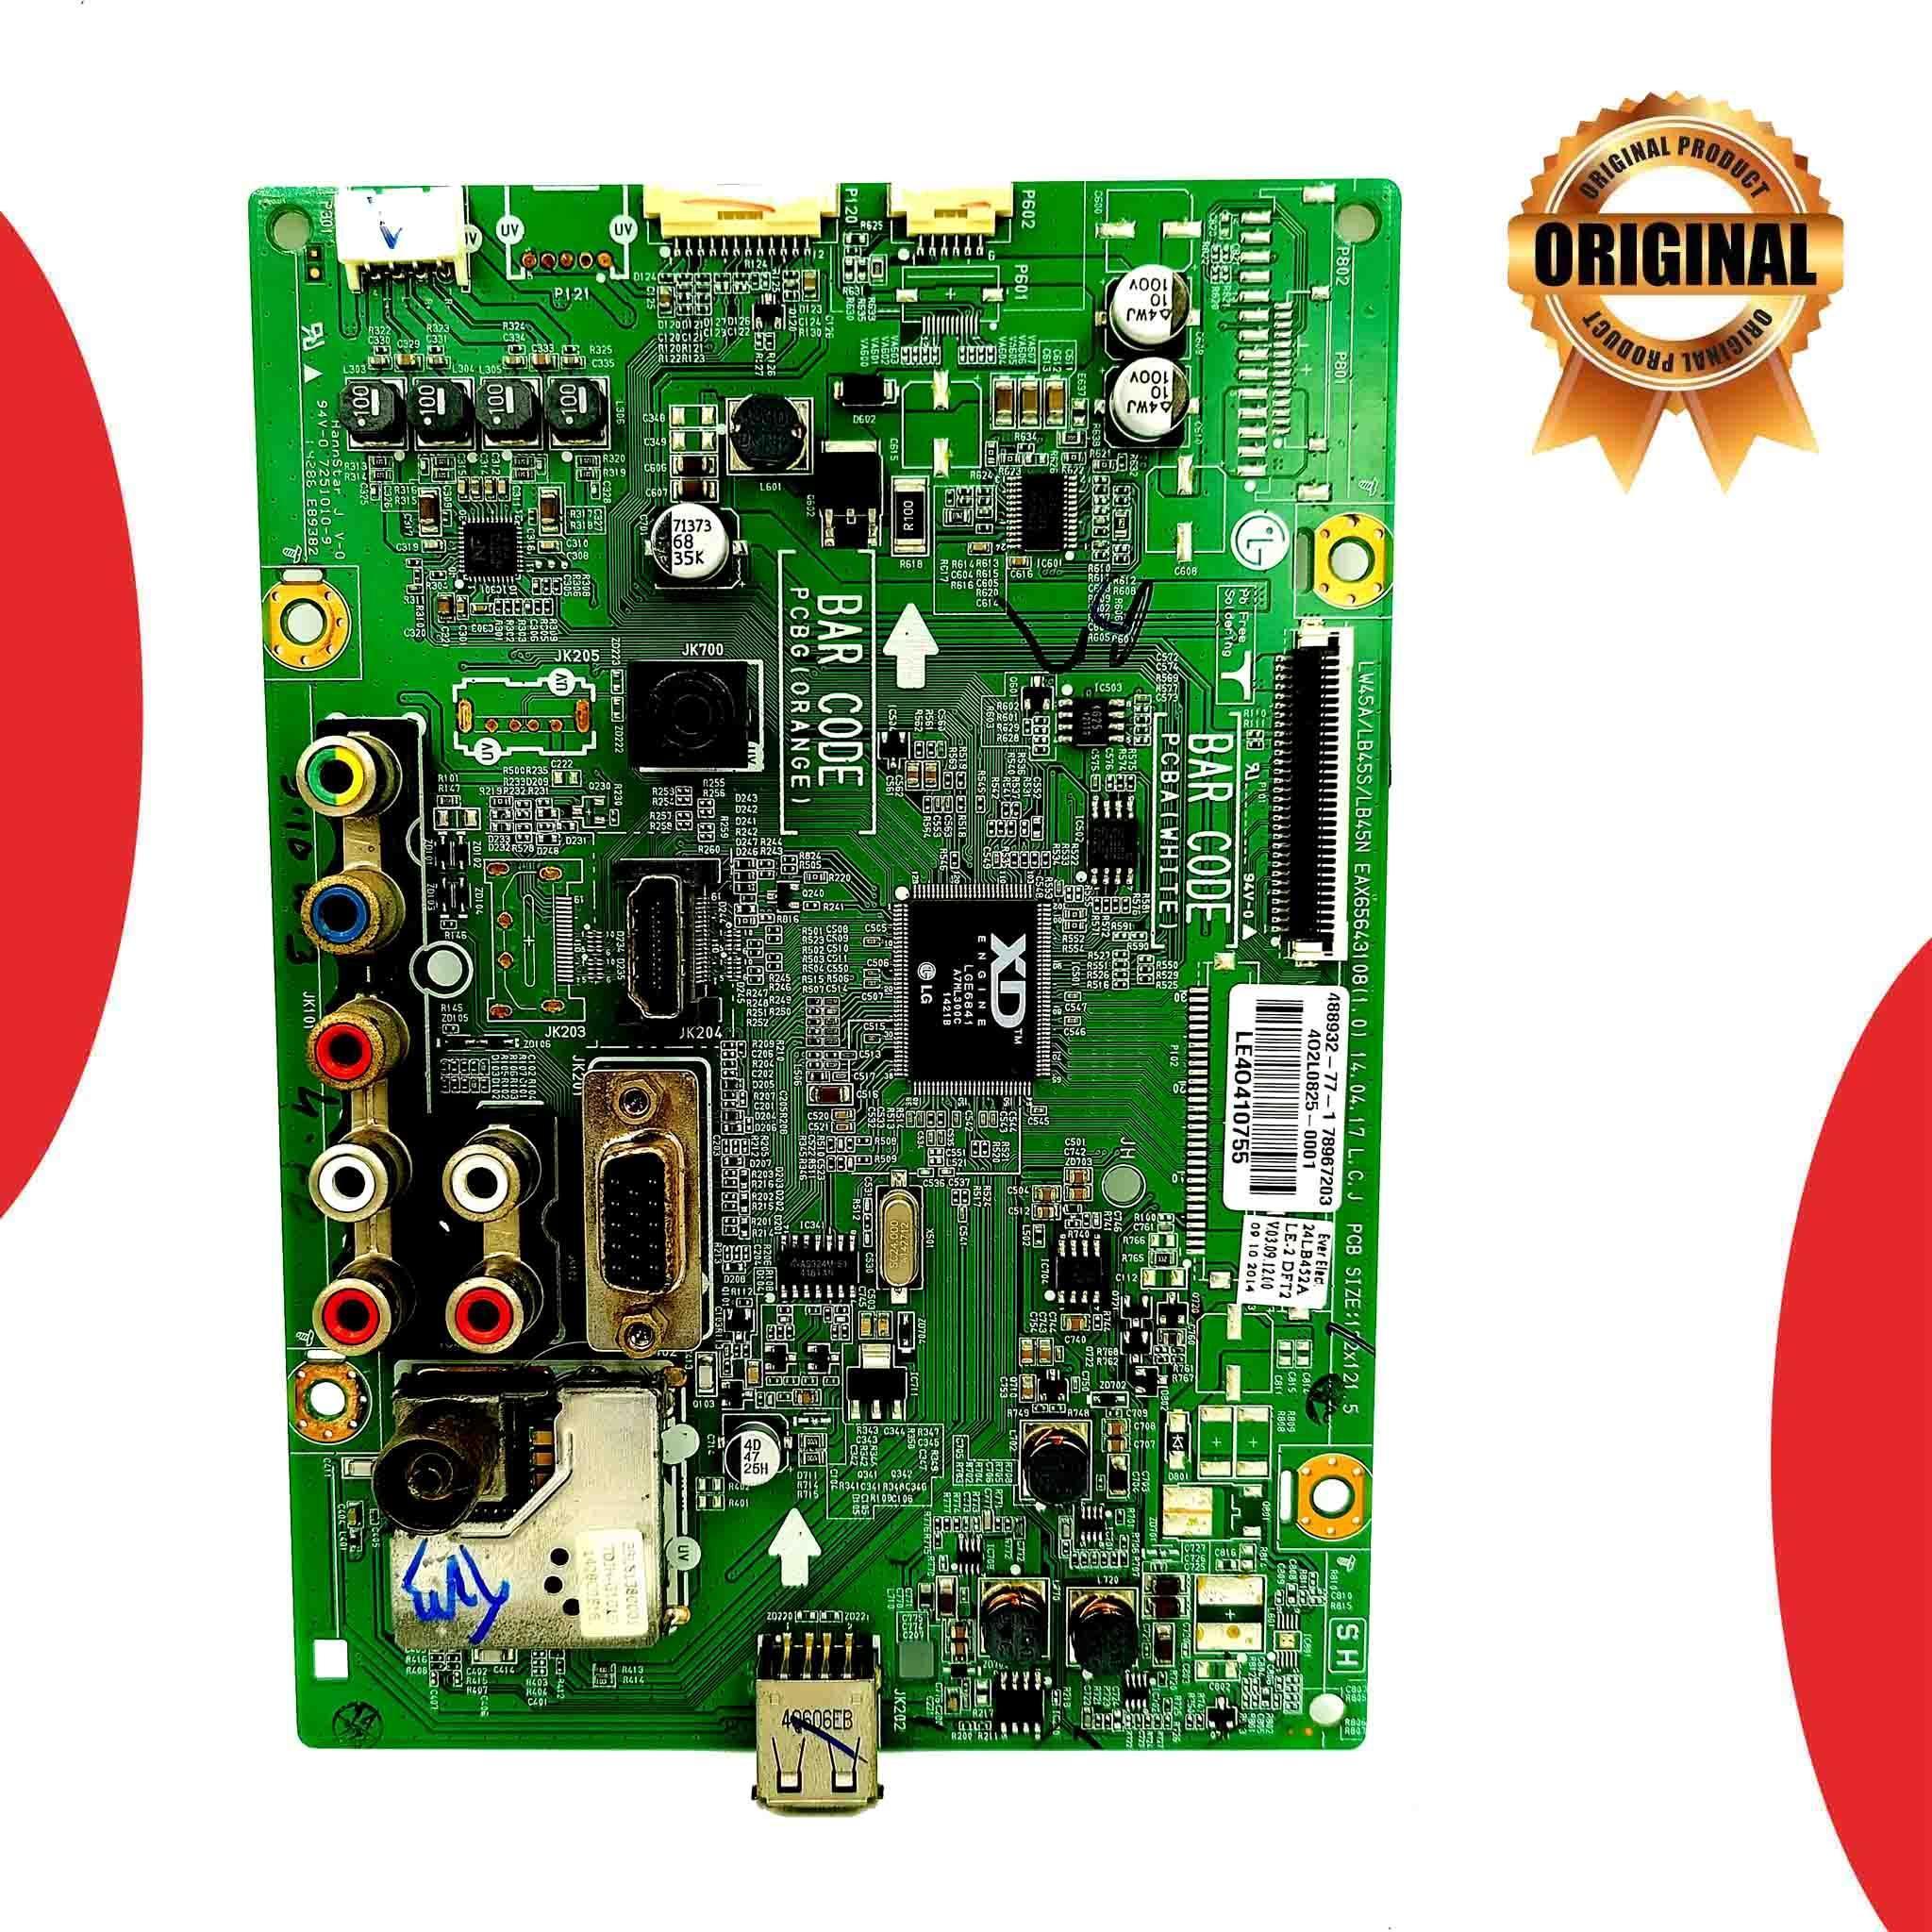 LG 22 inch LED TV Motherboard for Model 22LB452A-TB - Great Bharat Electronics